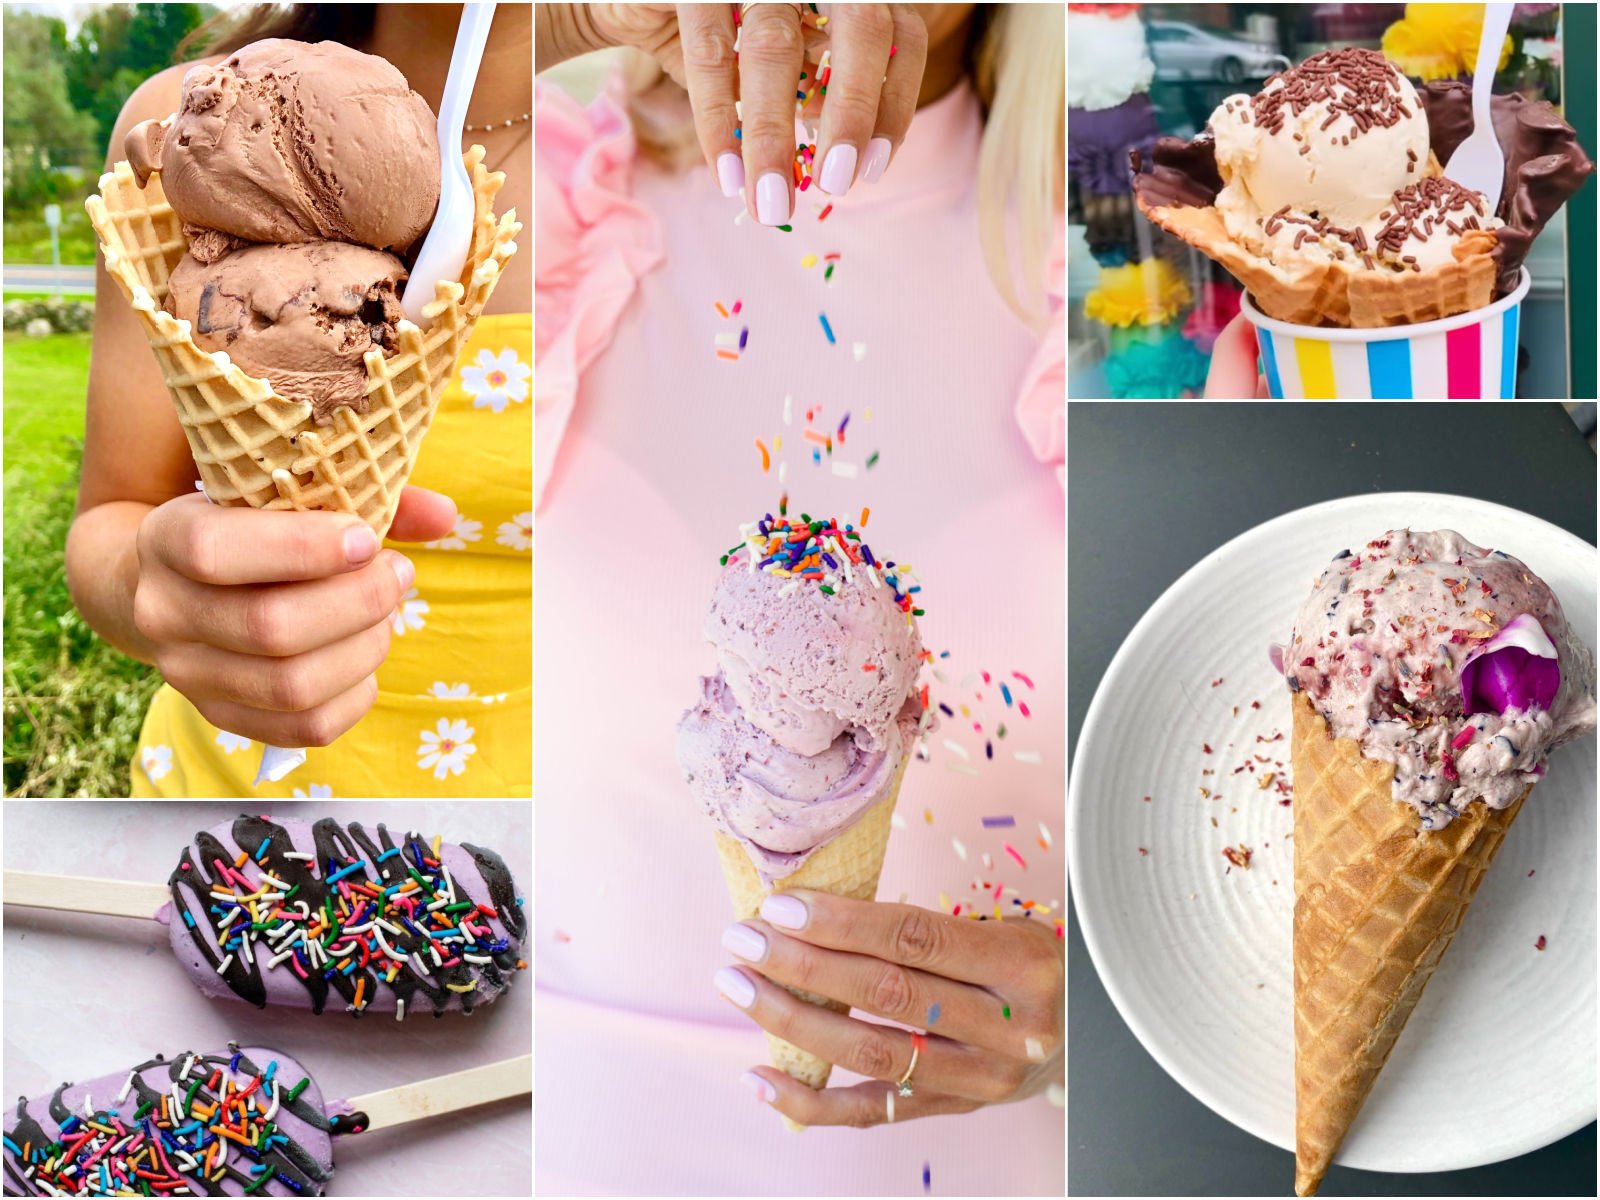 You Can Now Super-Size Sundaes With This Giant Ice Cream Scoop - Eater